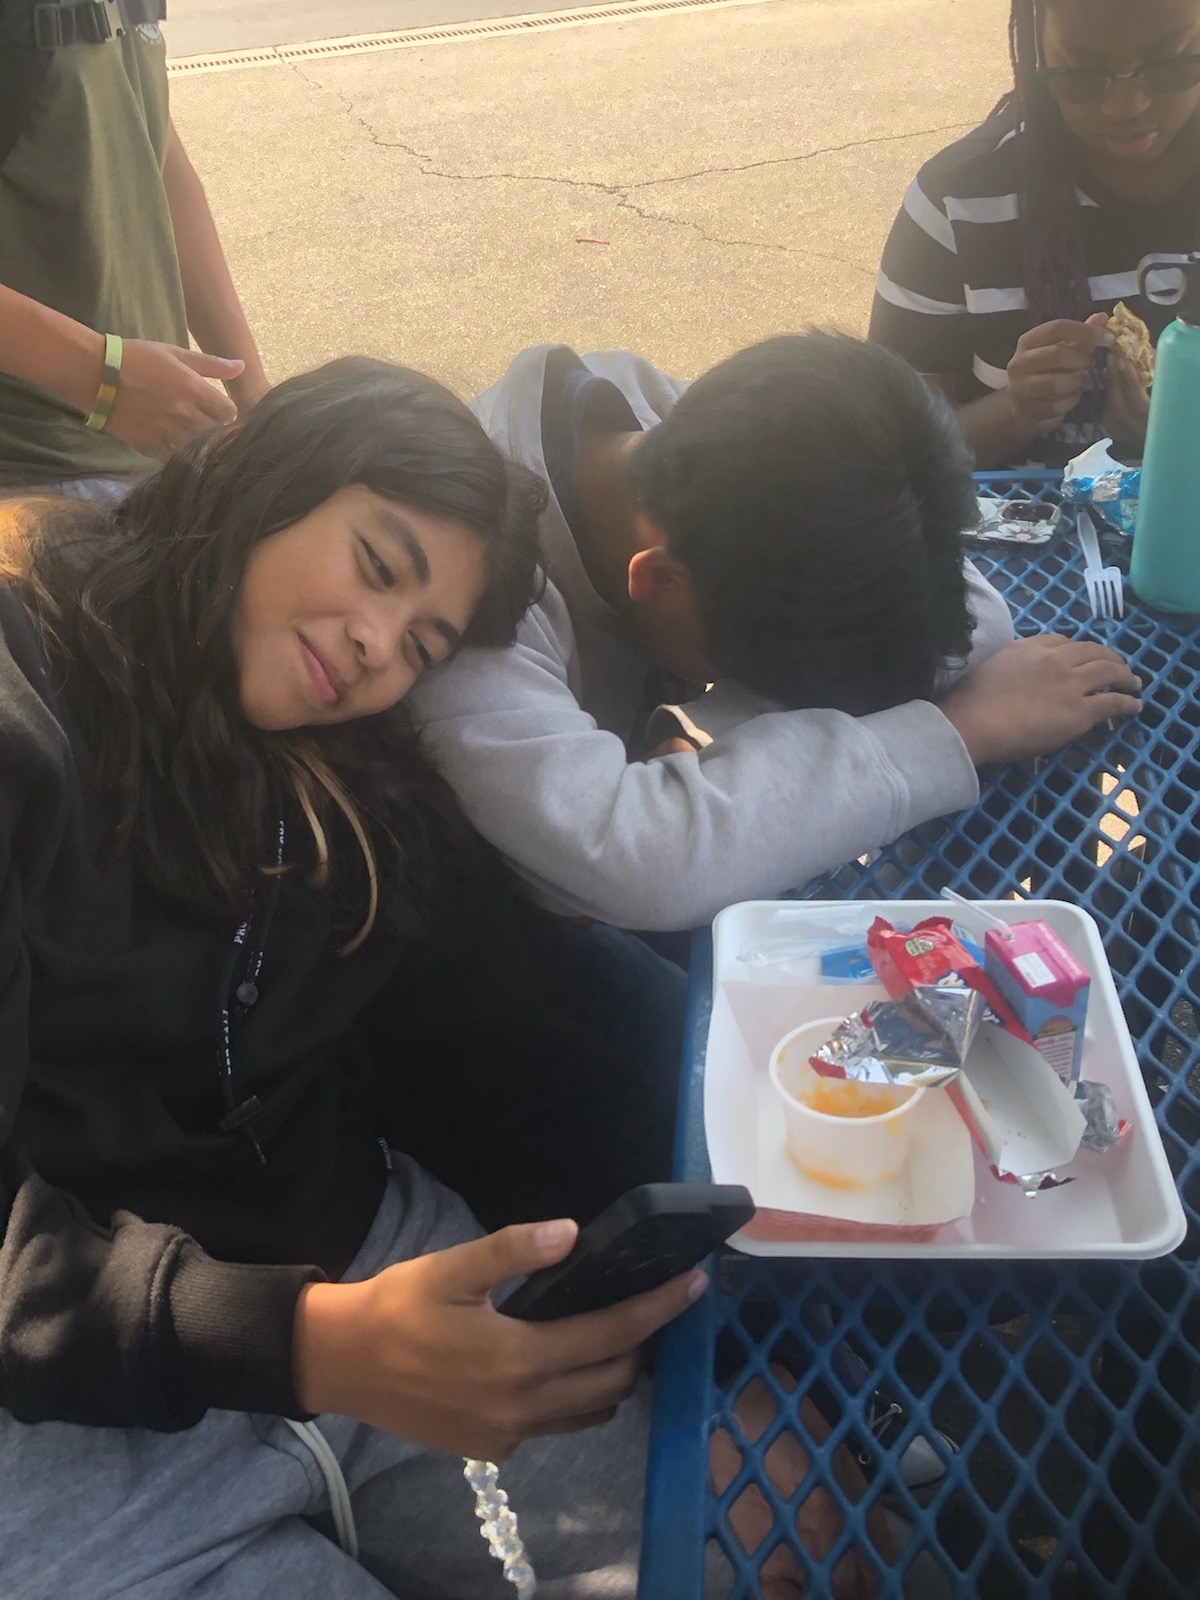 Students Janessa Hallman (left) and Liam Acelar (Right) relax during lunch by talking and going on social media